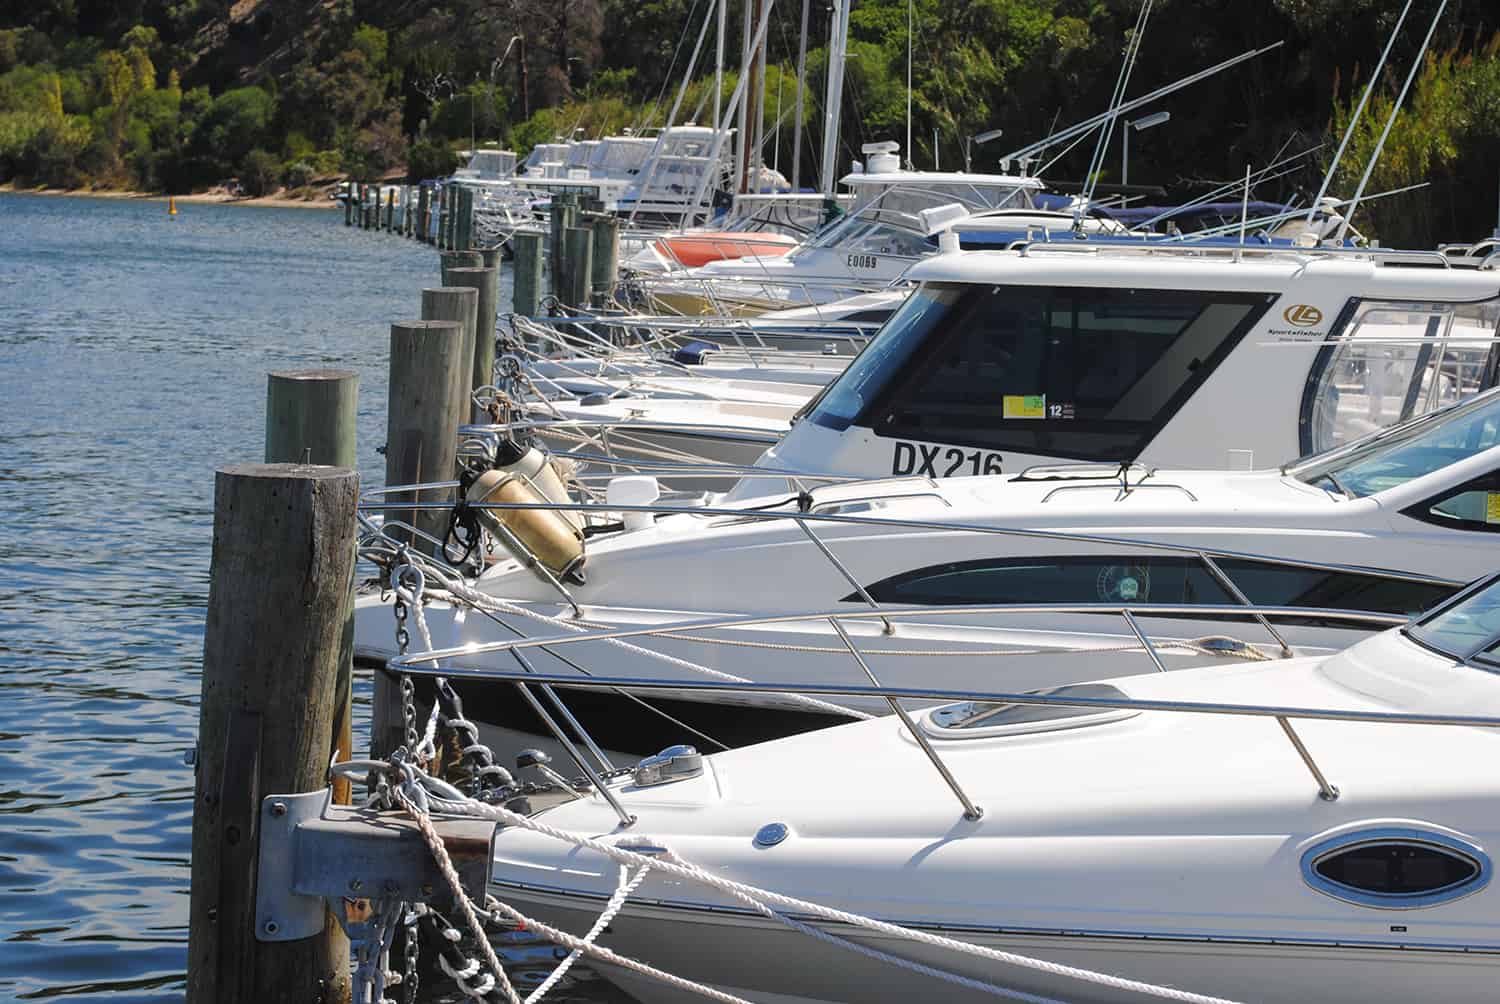 Moored Yachts at Claremont Yacht Club